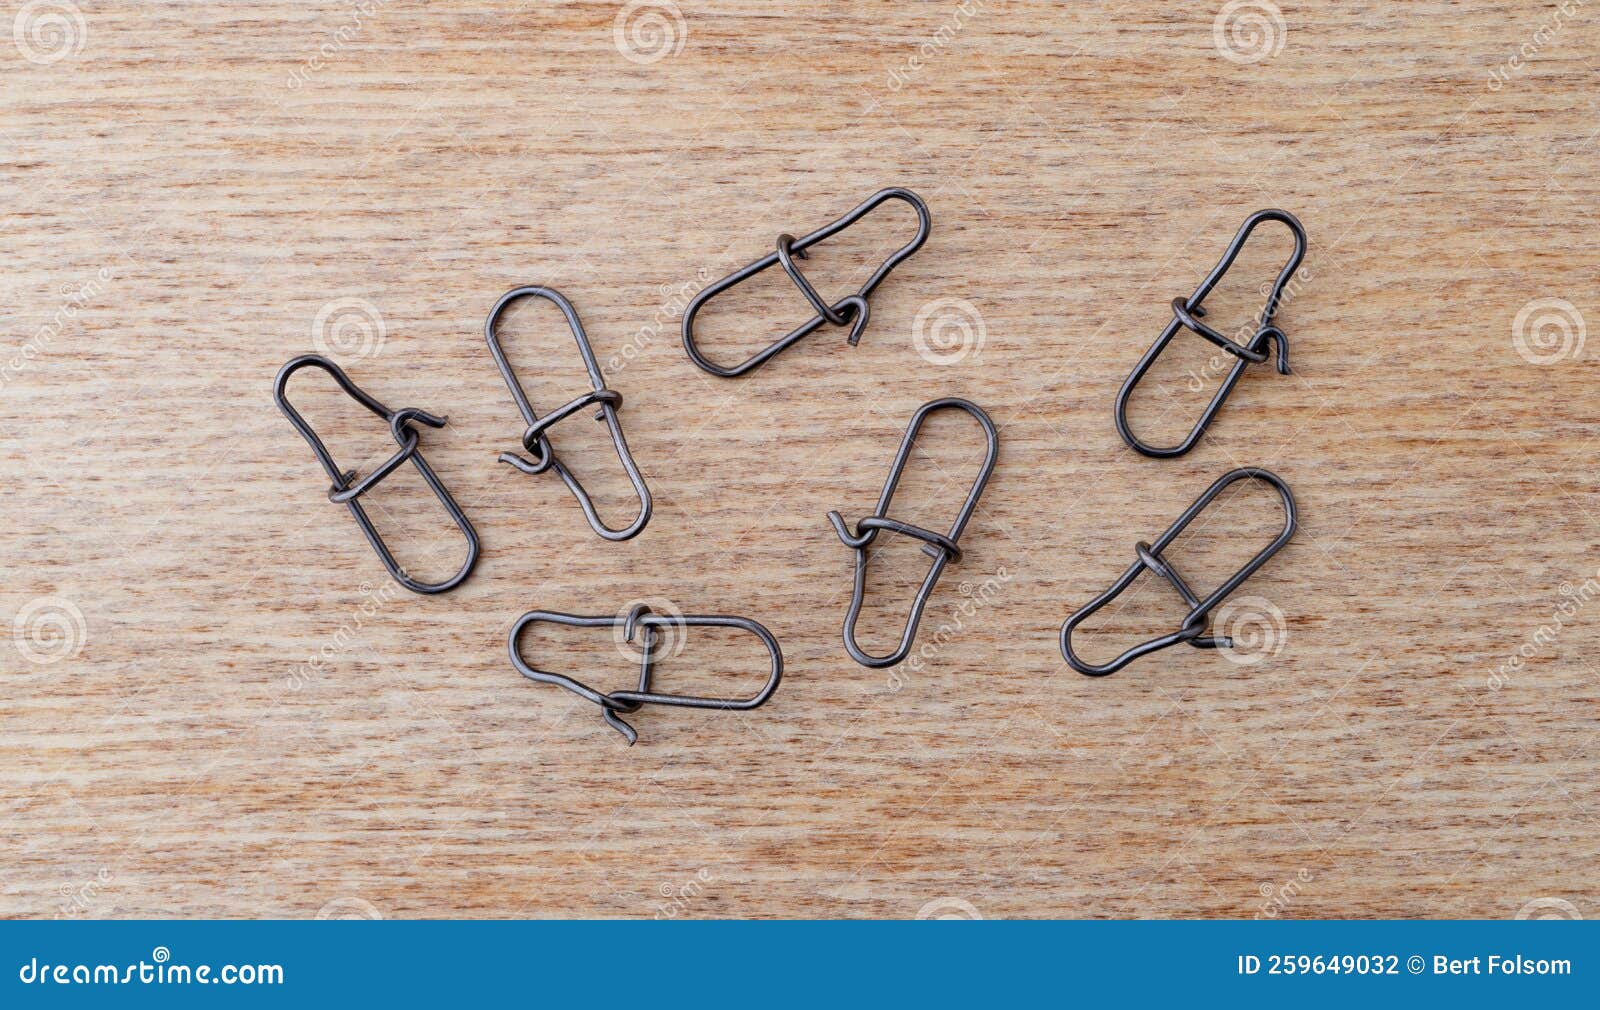 top view of a group of lock snaps used for fishing leaders on a wood background